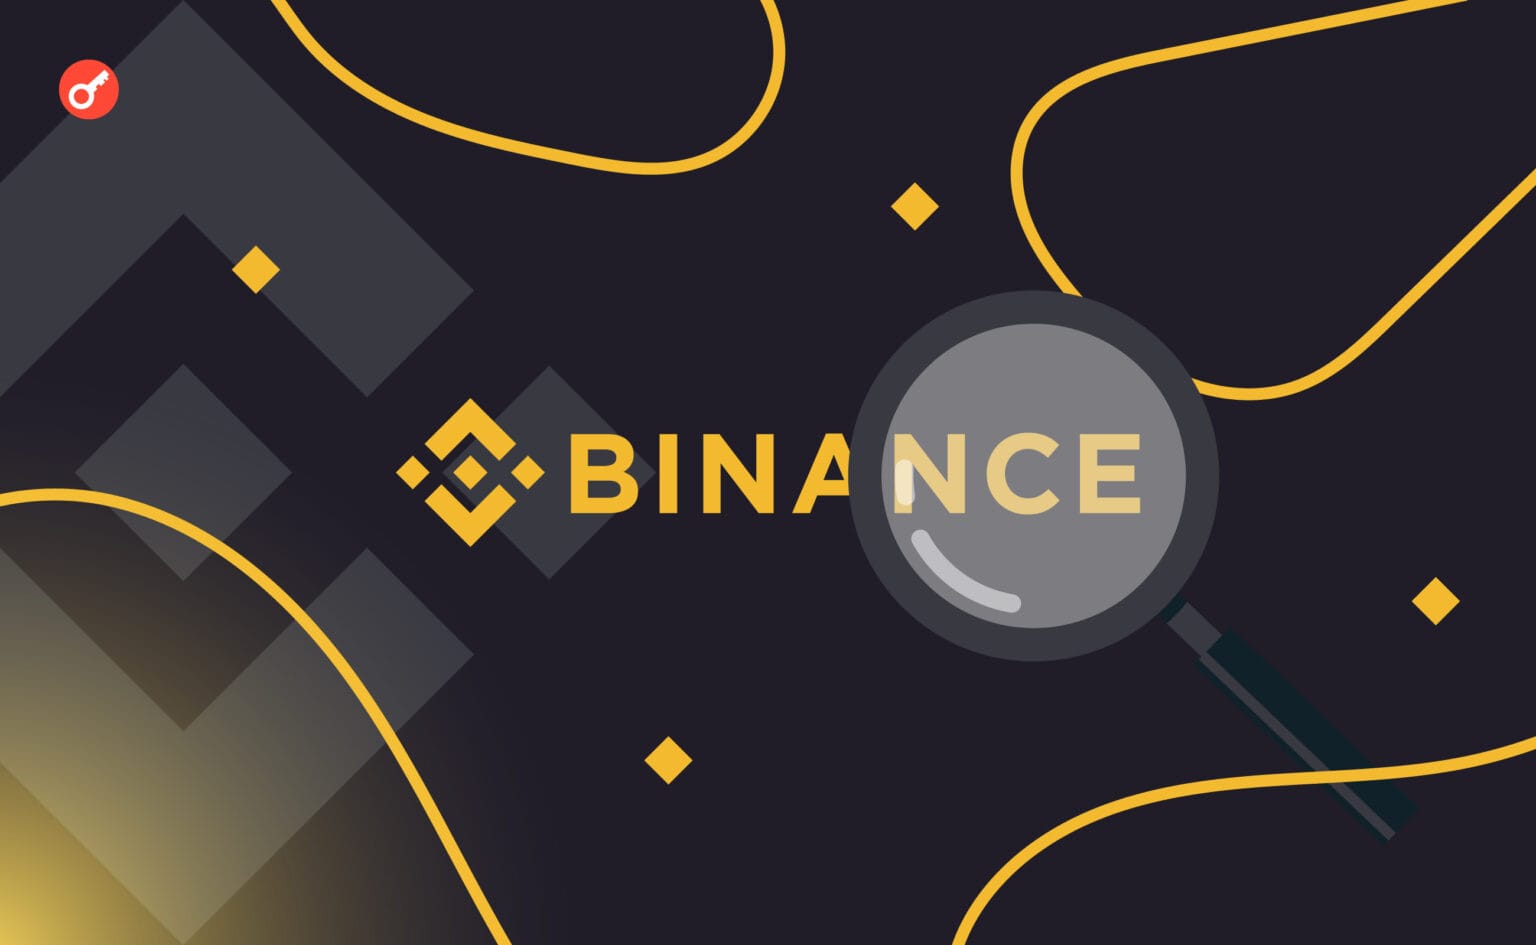 Media: Binance allowed large traders to store assets with third-party companies